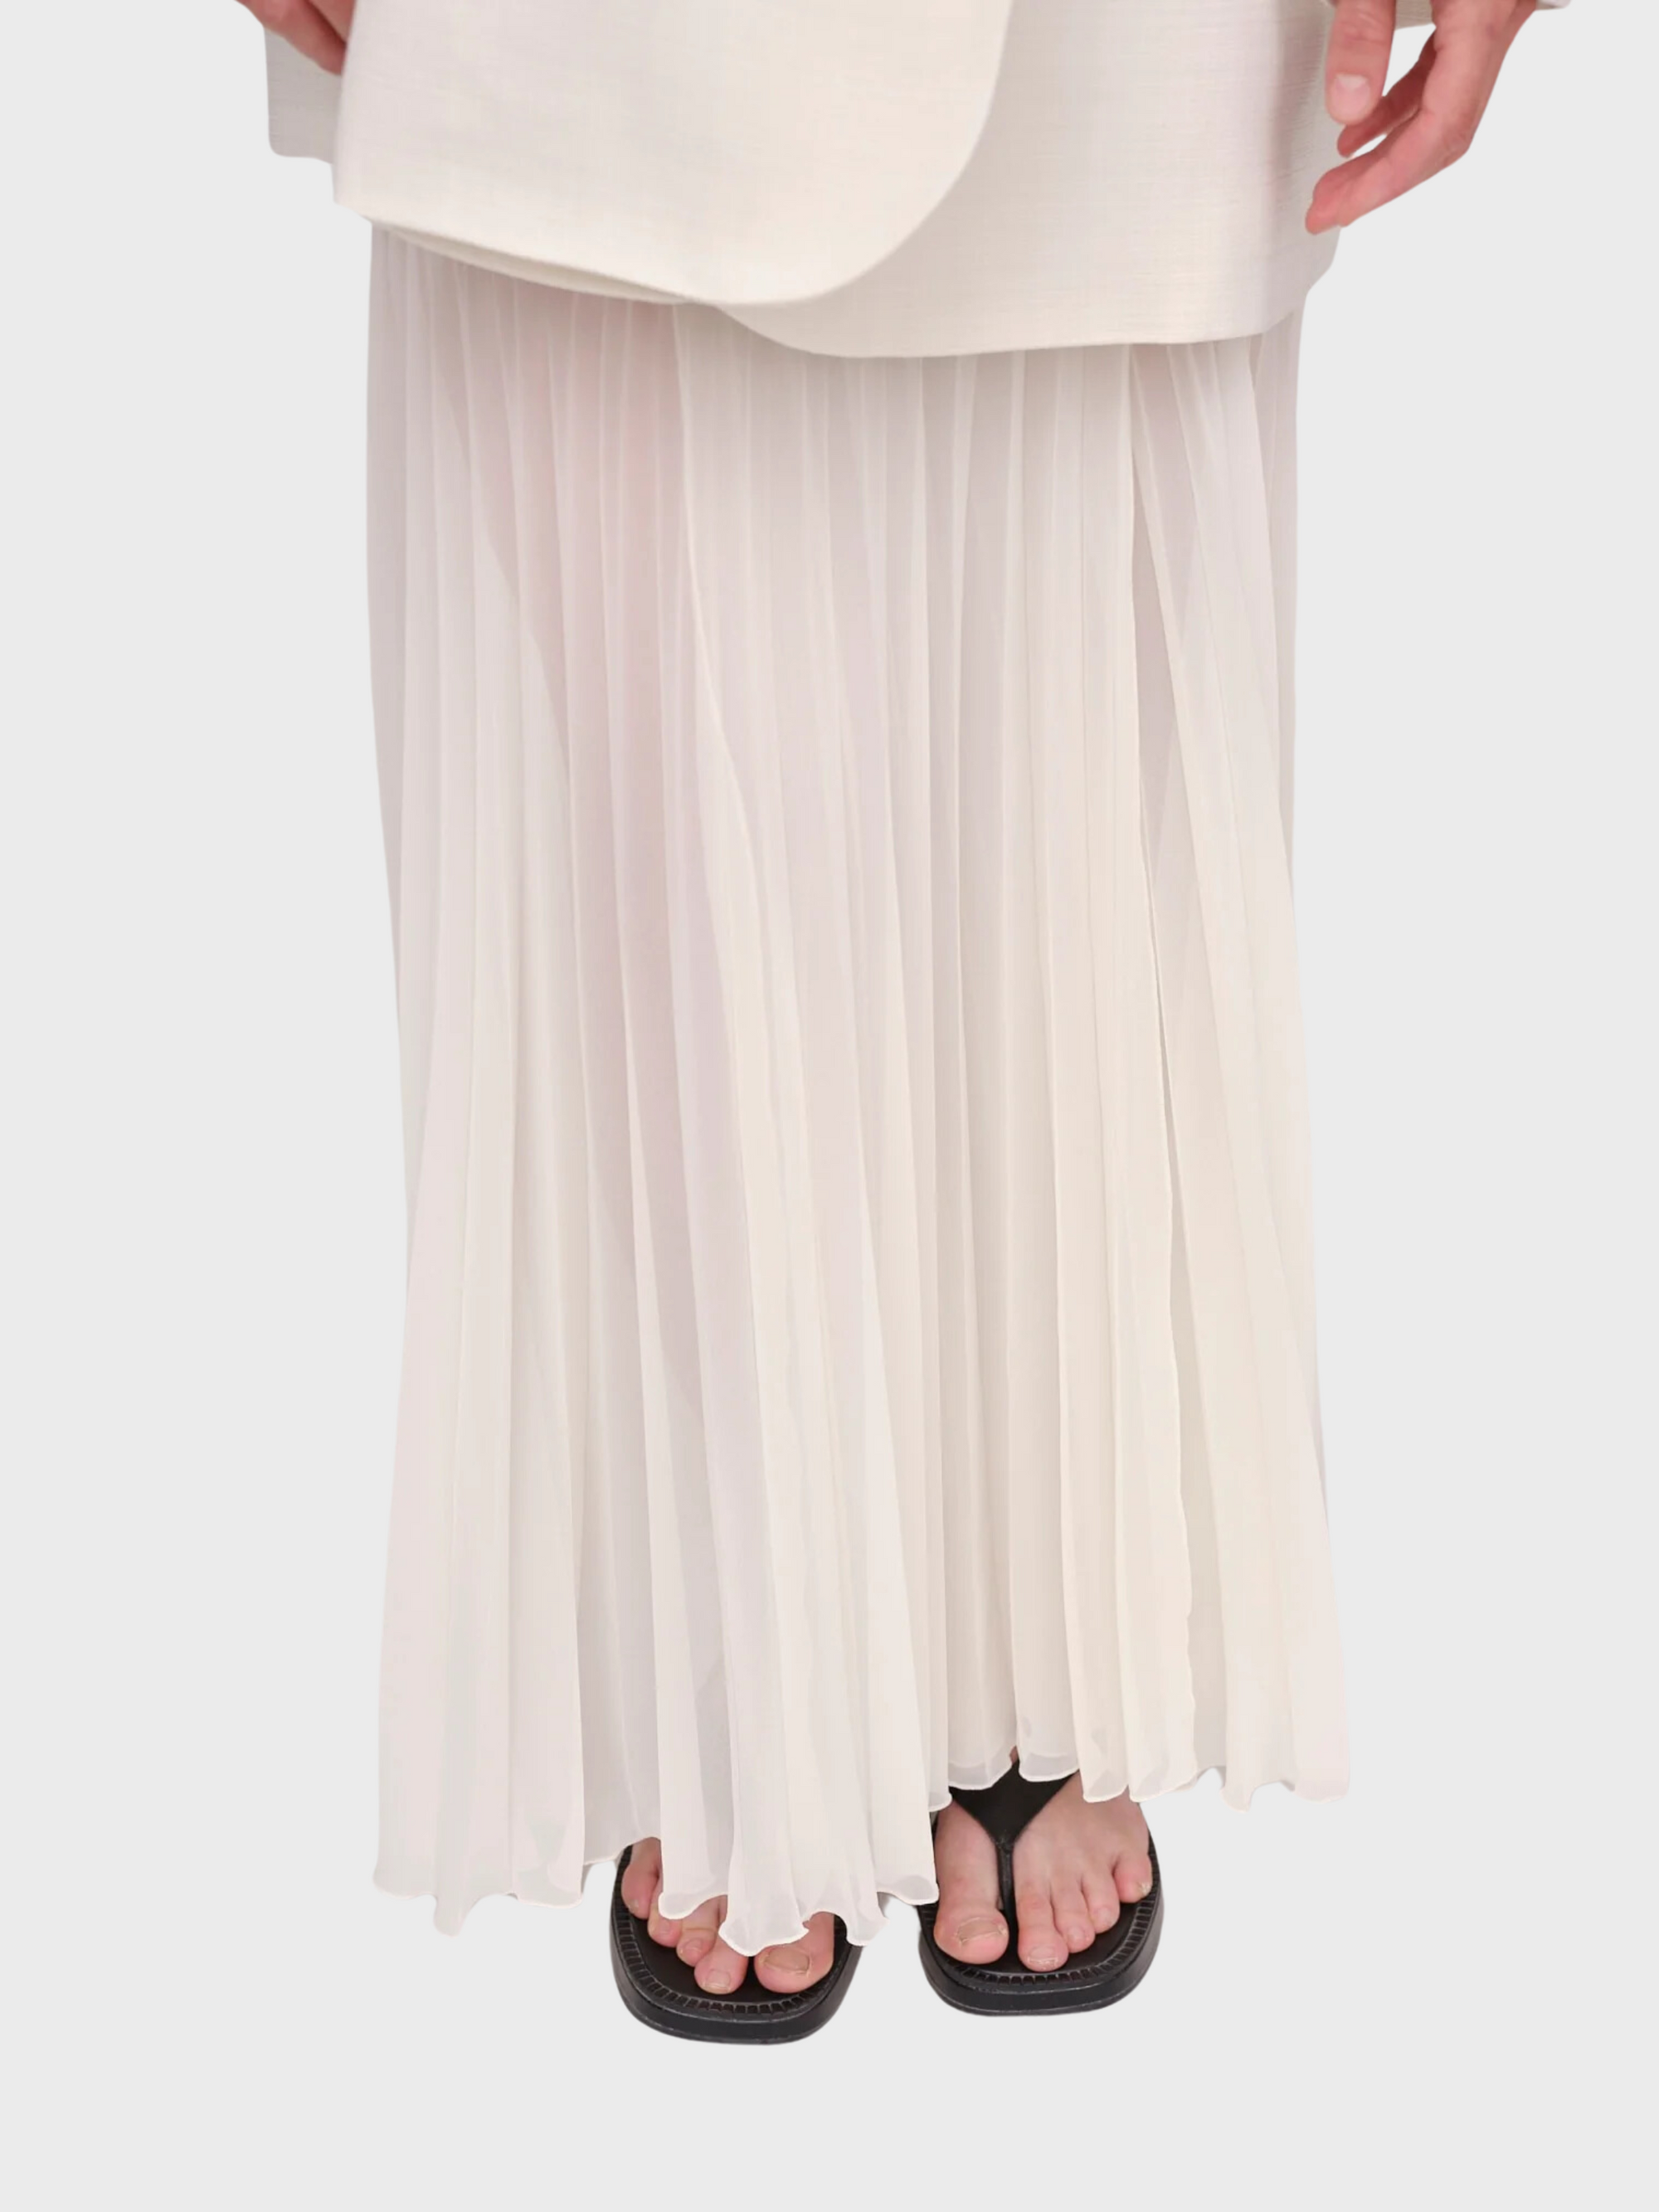 Herskind Nessa Skirt Medium White-Dresses-West of Woodward Boutique-Vancouver-Canada